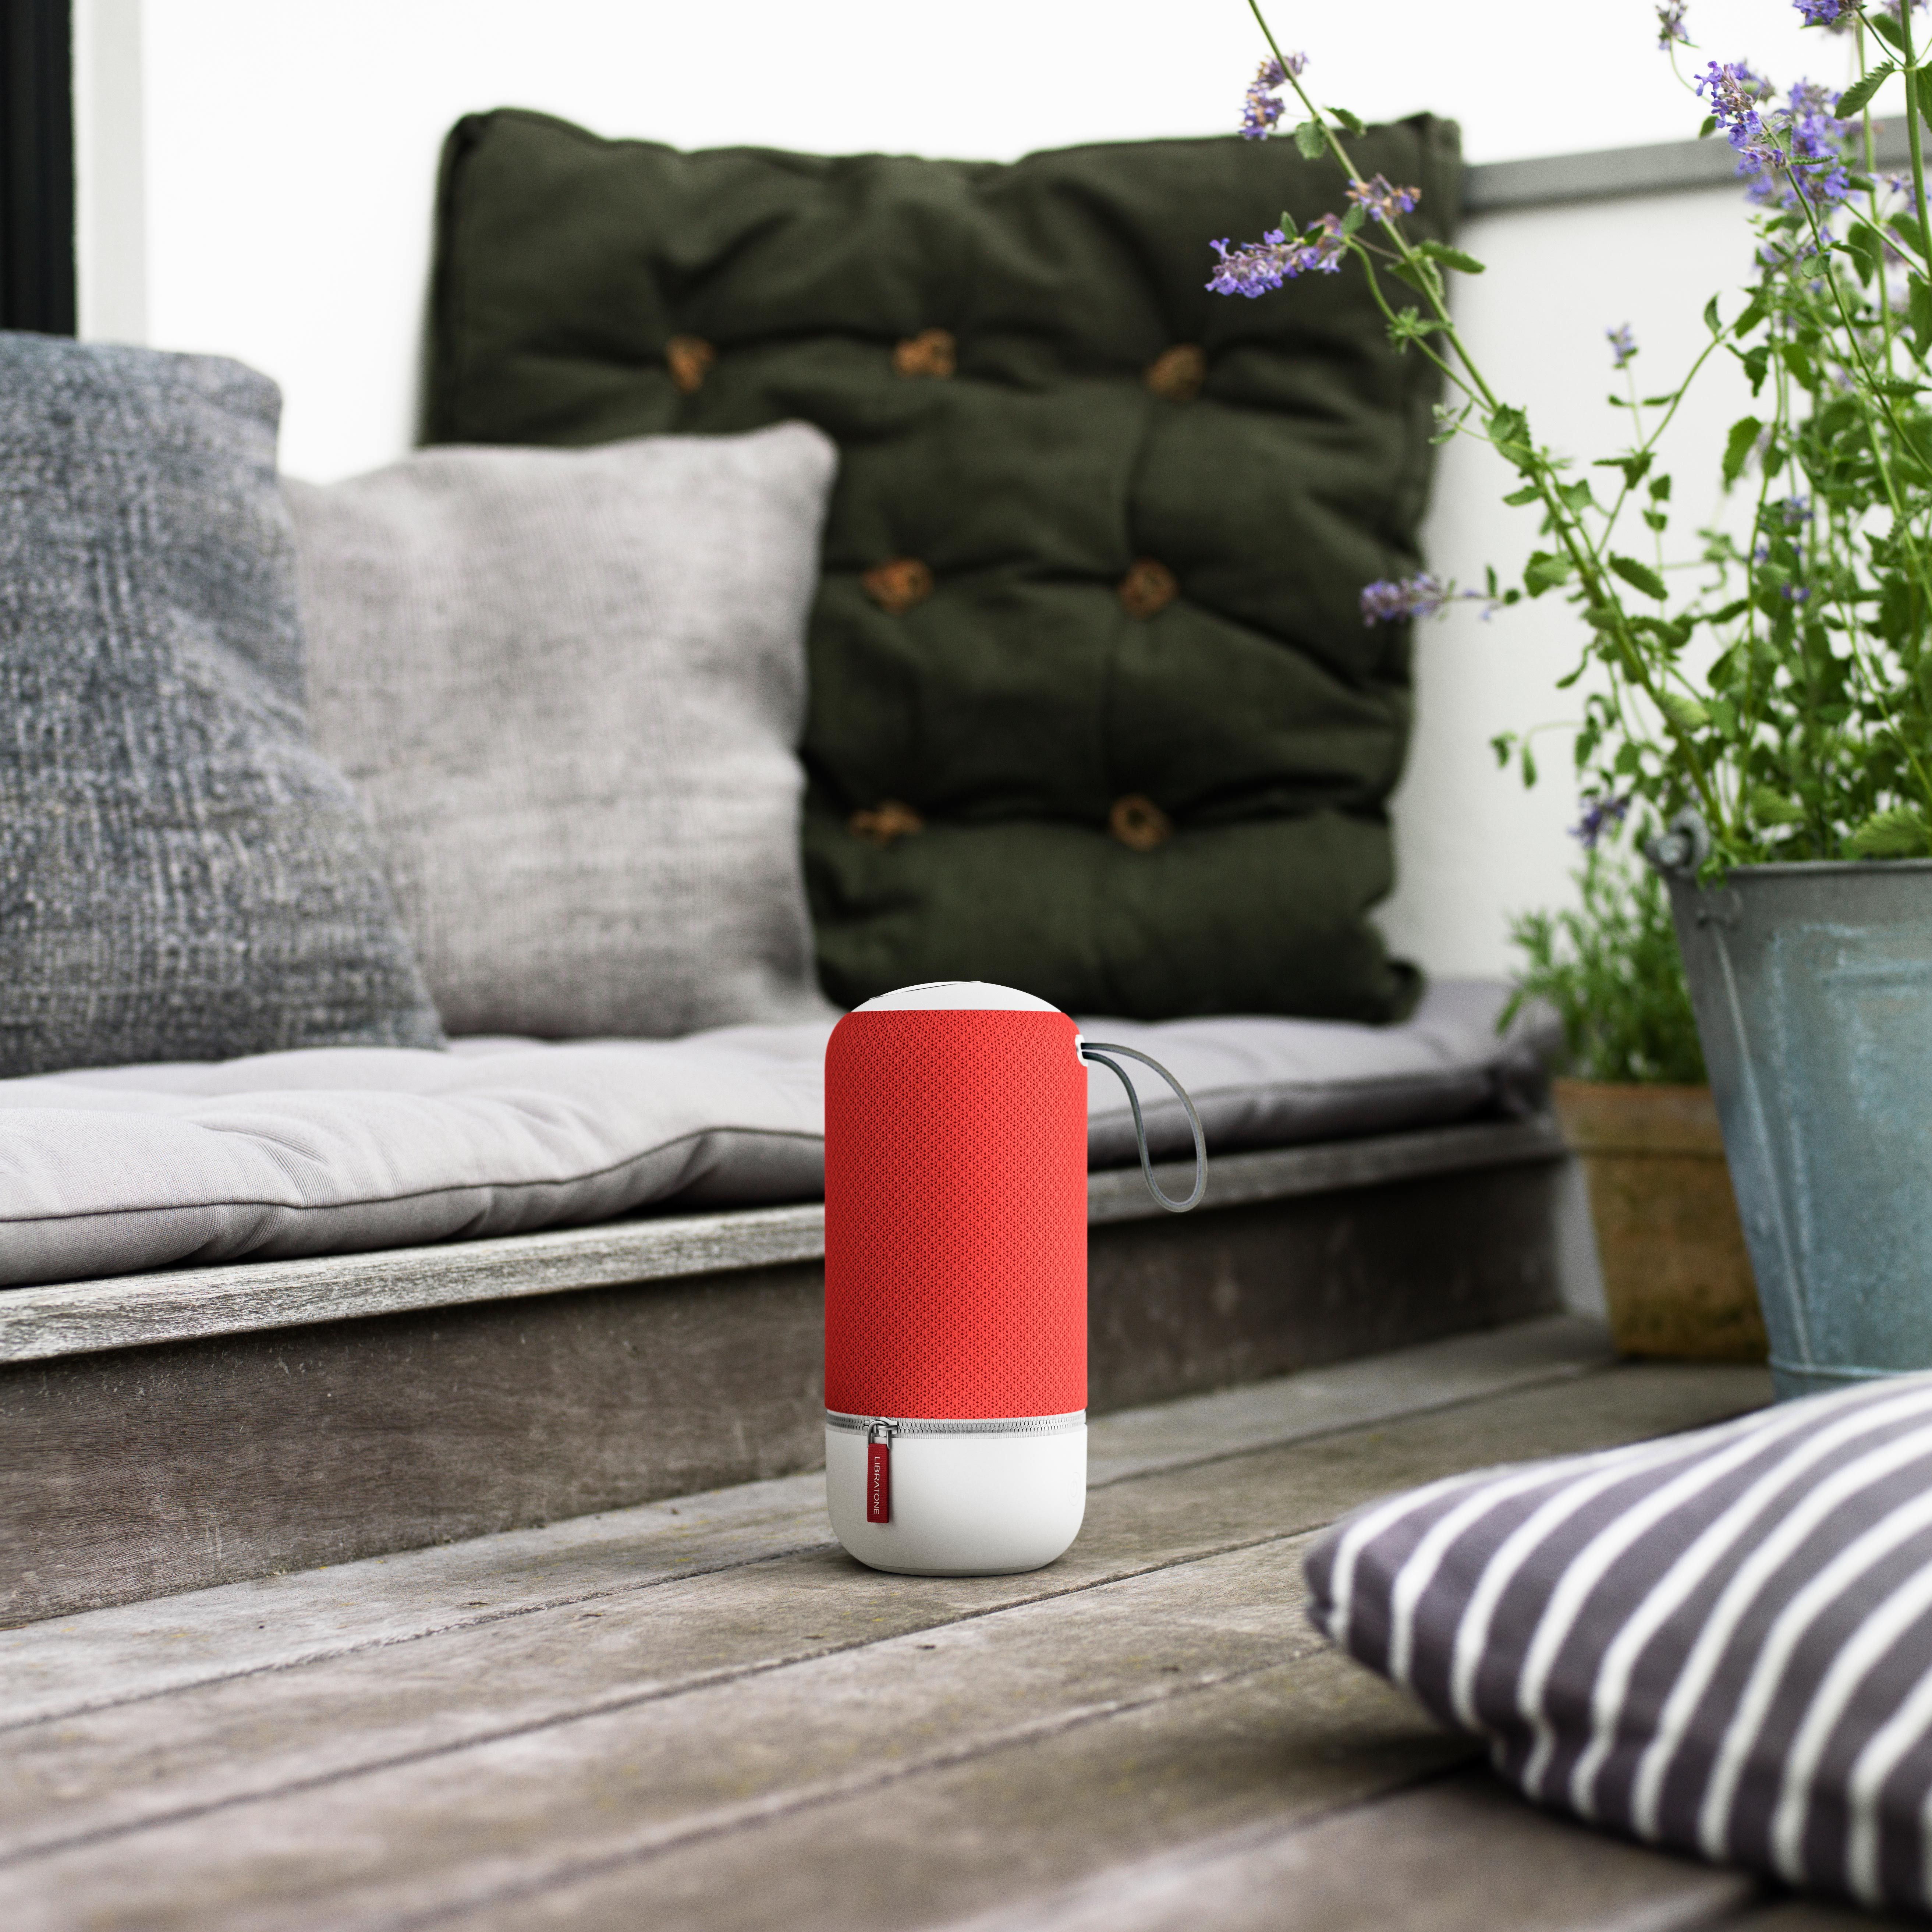 Libratone launches new Zipp speaker to create a music system Good Housekeeping Institute